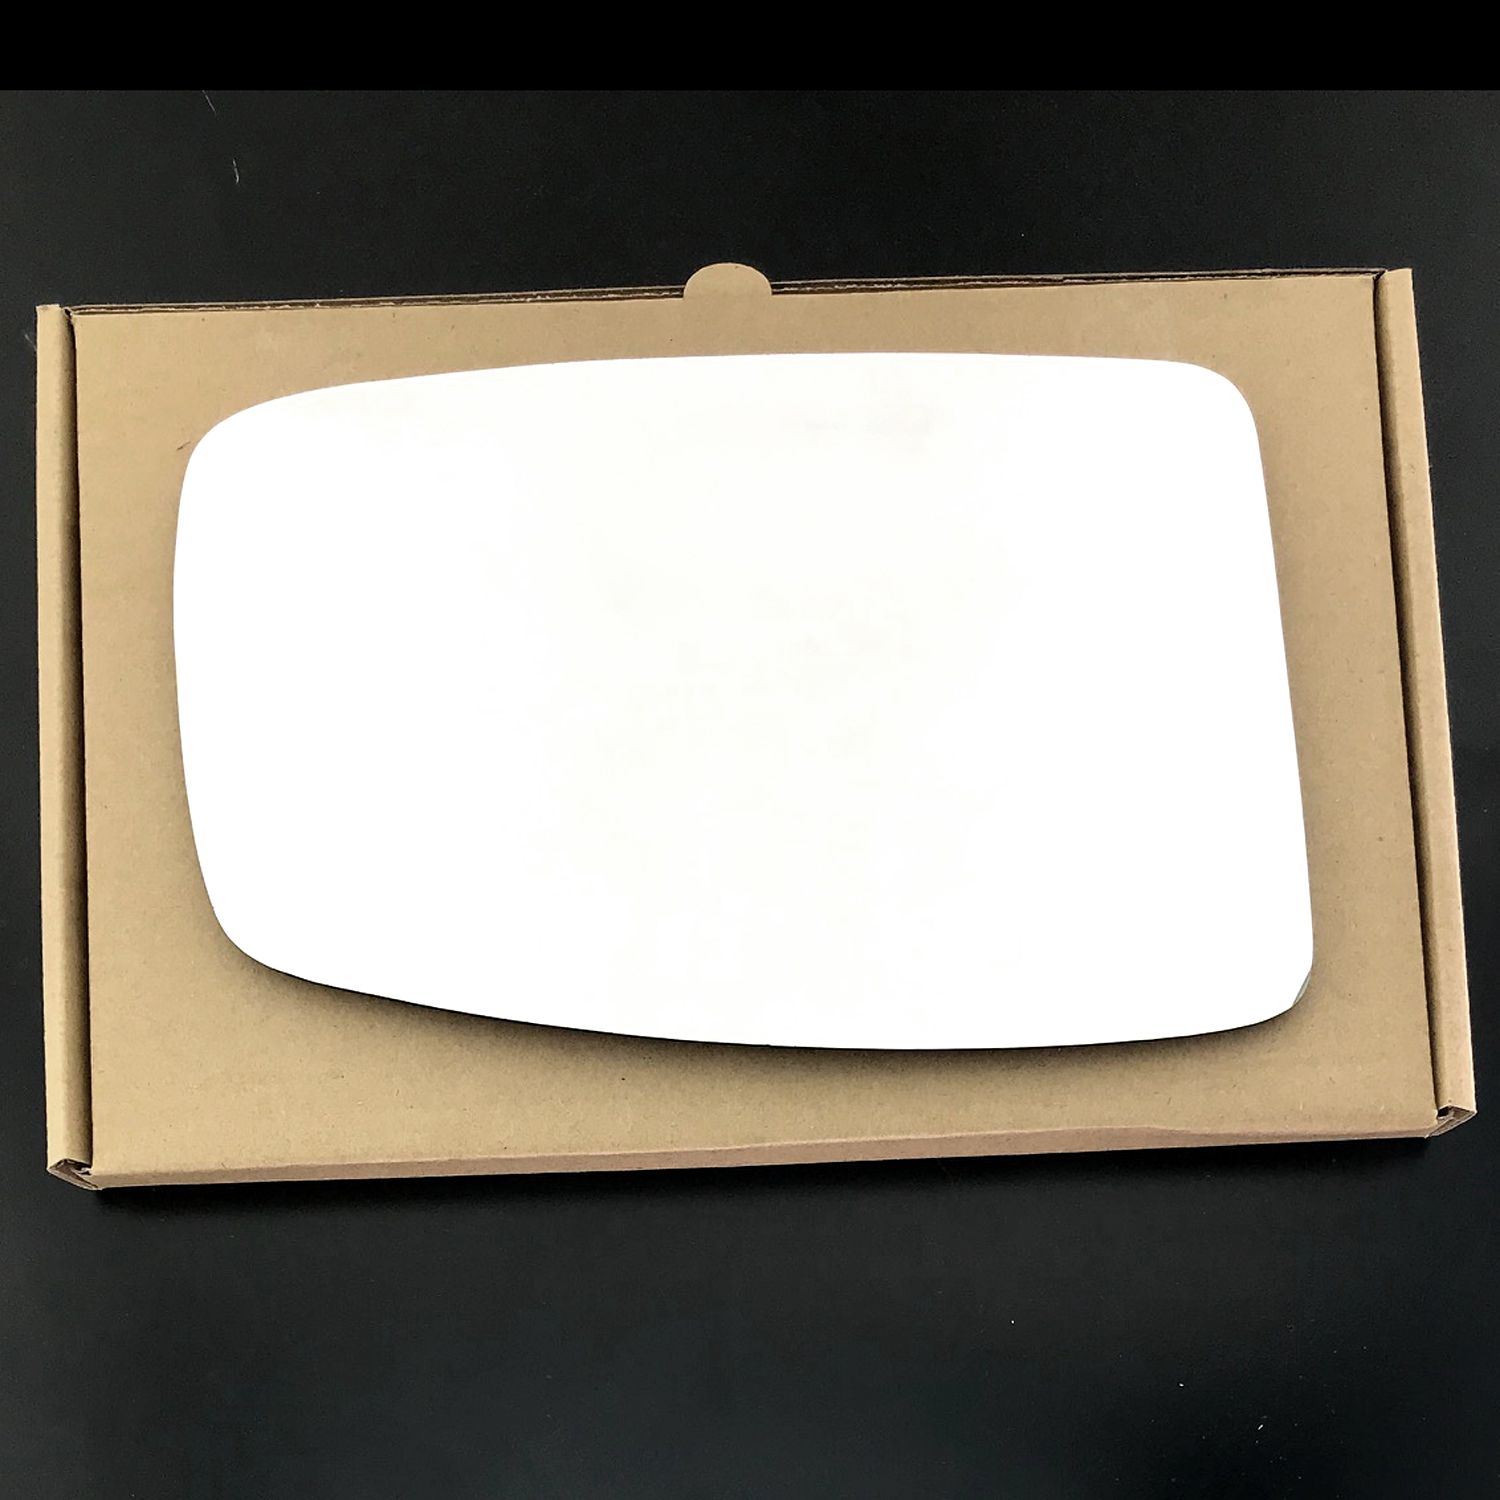 Renault Master Wing Mirror Glass LEFT HAND ( UK Passenger Side ) 2004 to 2009 – Convex Wing Mirror